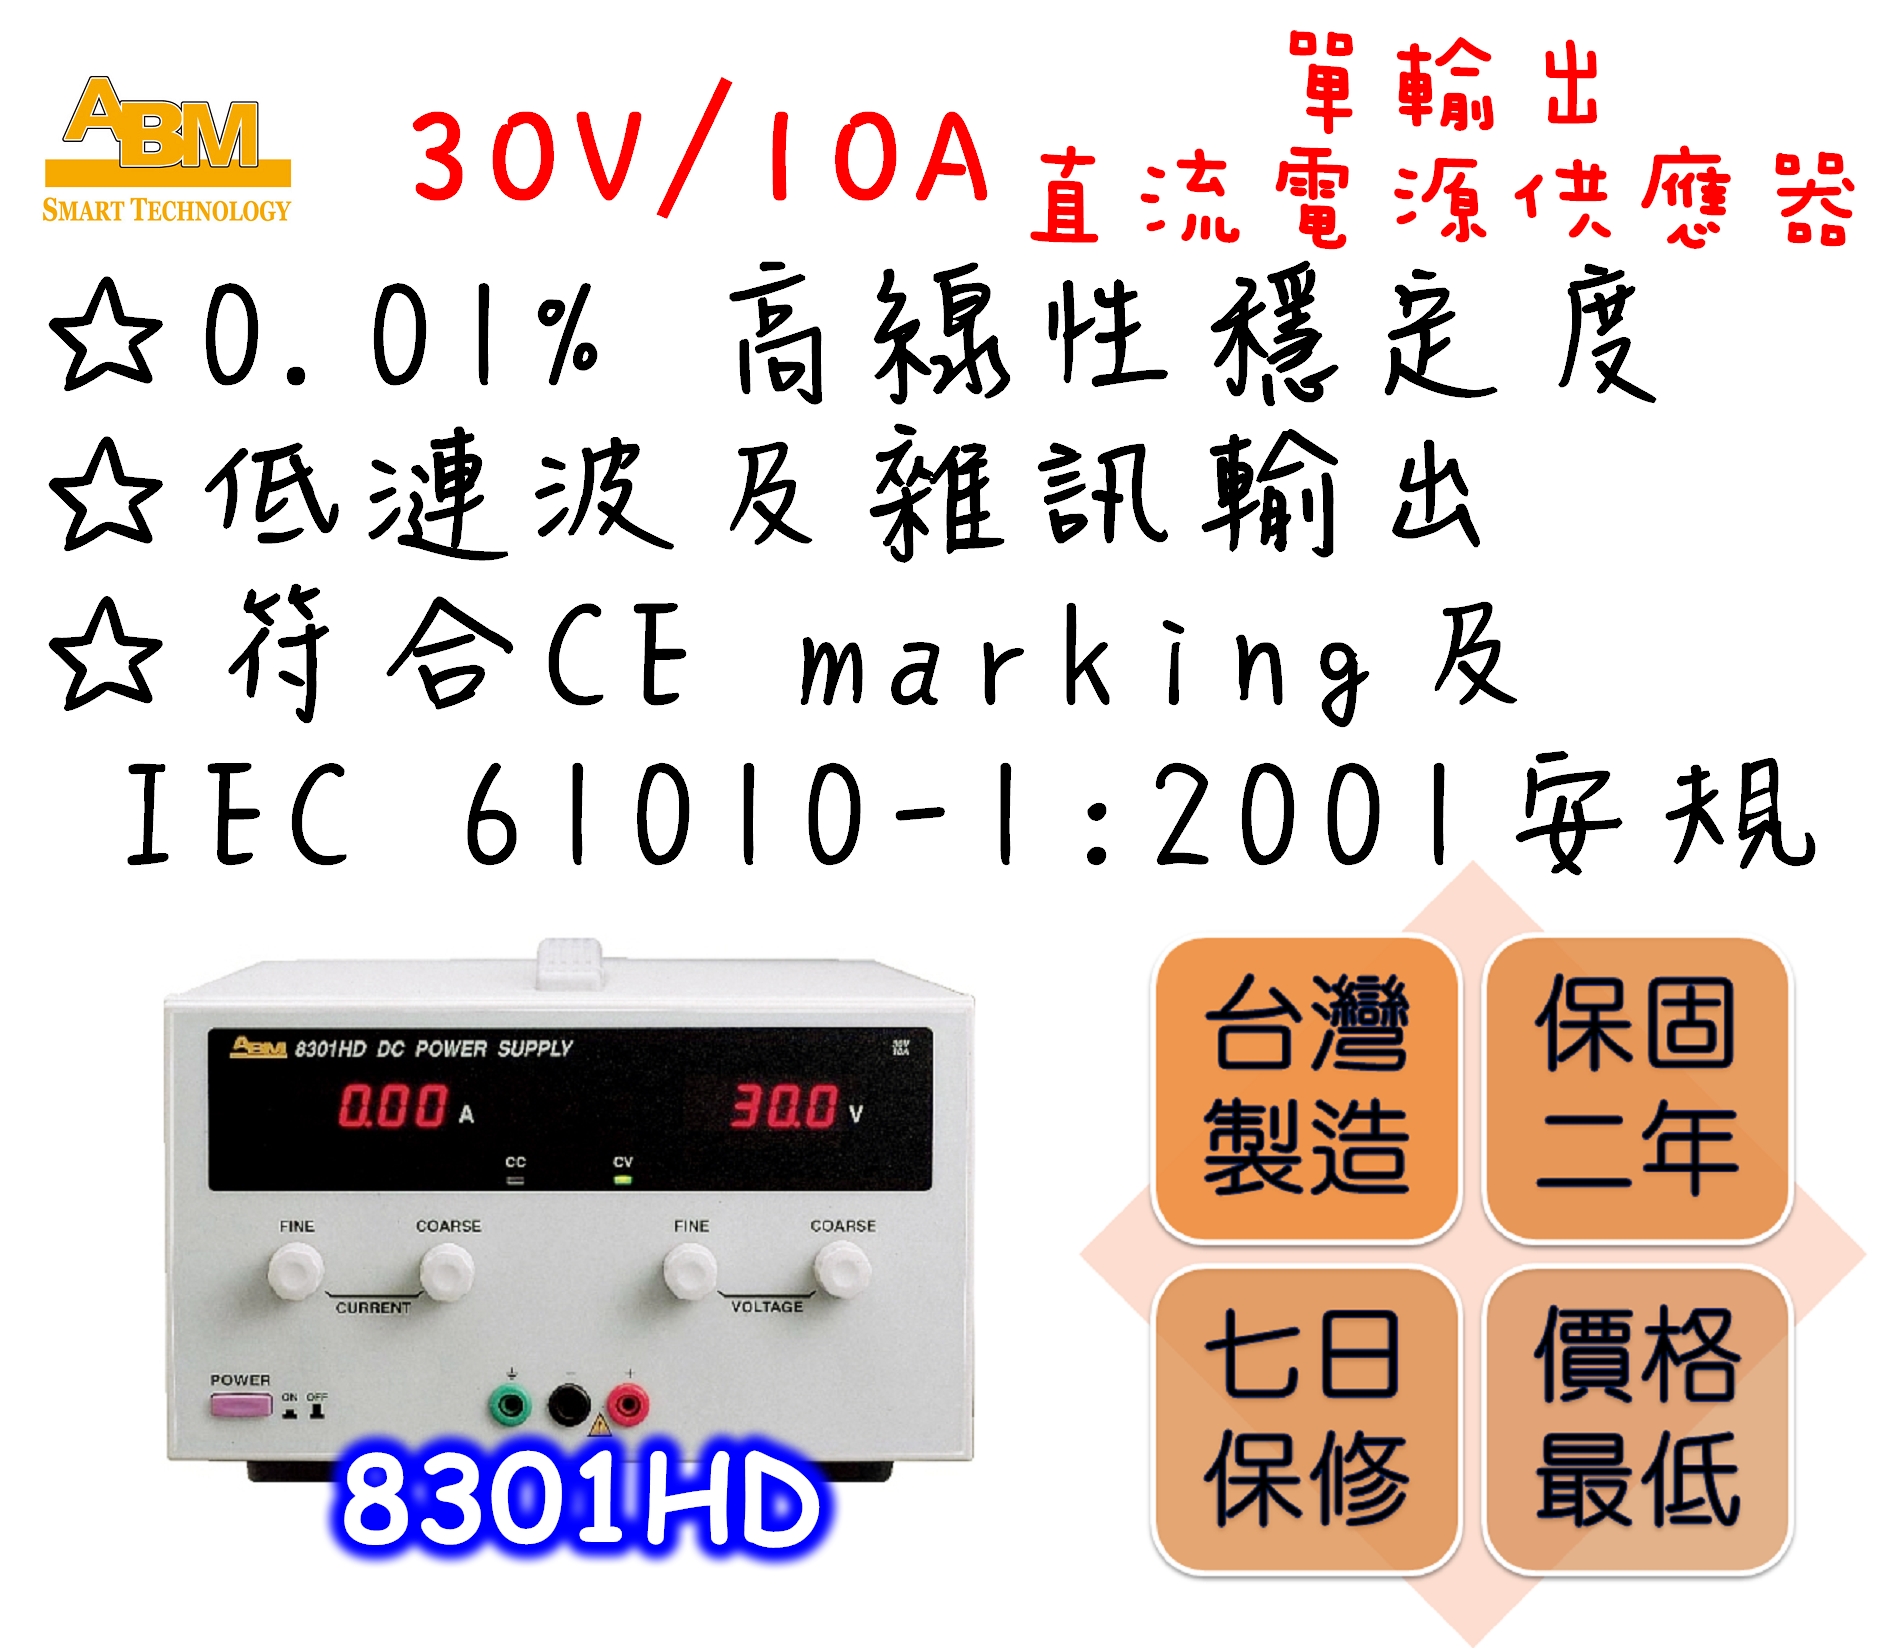 Constant voltage and constant current modes.
Output shortage and reversed current feeding protections.
0.01% high linear stability.
3-1/2 digits digital displays for both voltage and current outputs.
Automatic dual speed cooling fan design to reduce fan noise.
Low ripple and noise output.
Comply with CE marking and IEC 61010-1:2001 safety regulations